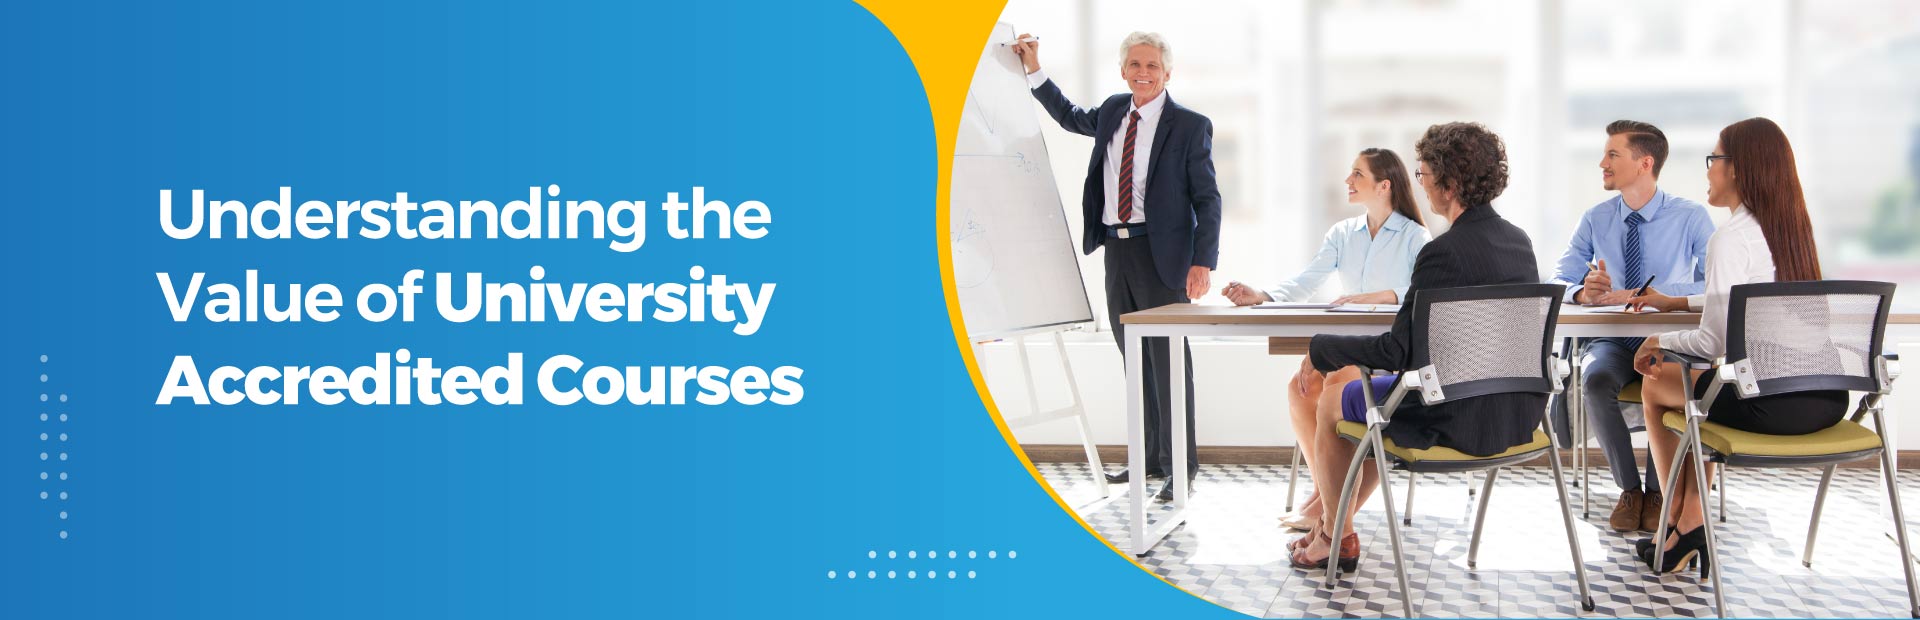 Understanding the Value of University Accredited Courses